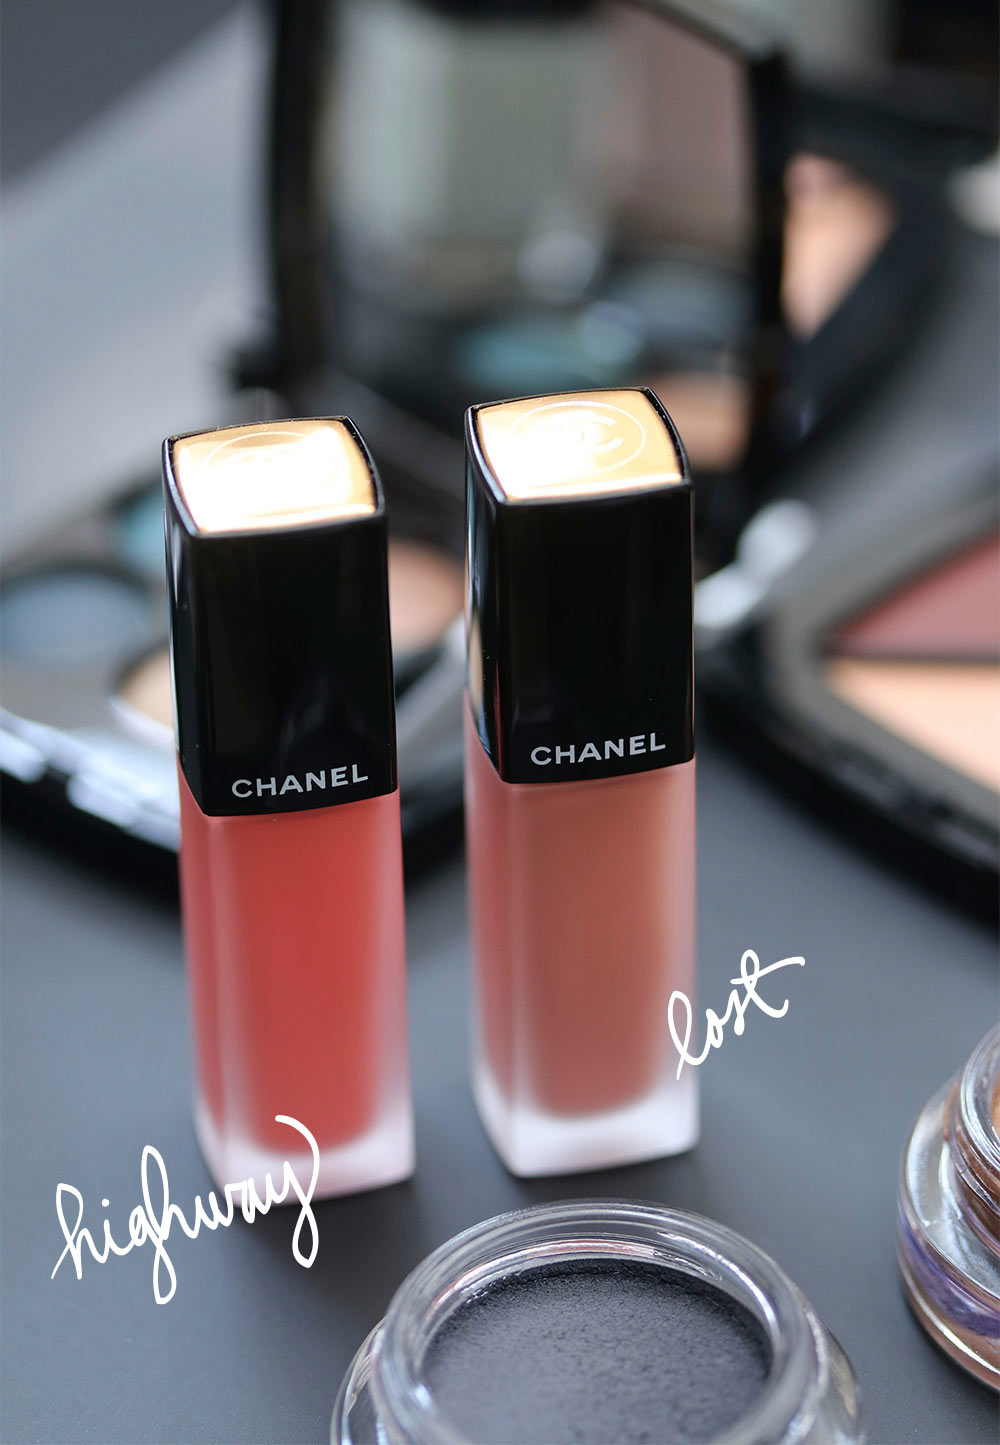 Chanel Highway and Lost, the Two Chanel Rouge Ink Liquid Lipsticks From the Fall Travel Diary Collection - Makeup and Beauty Blog